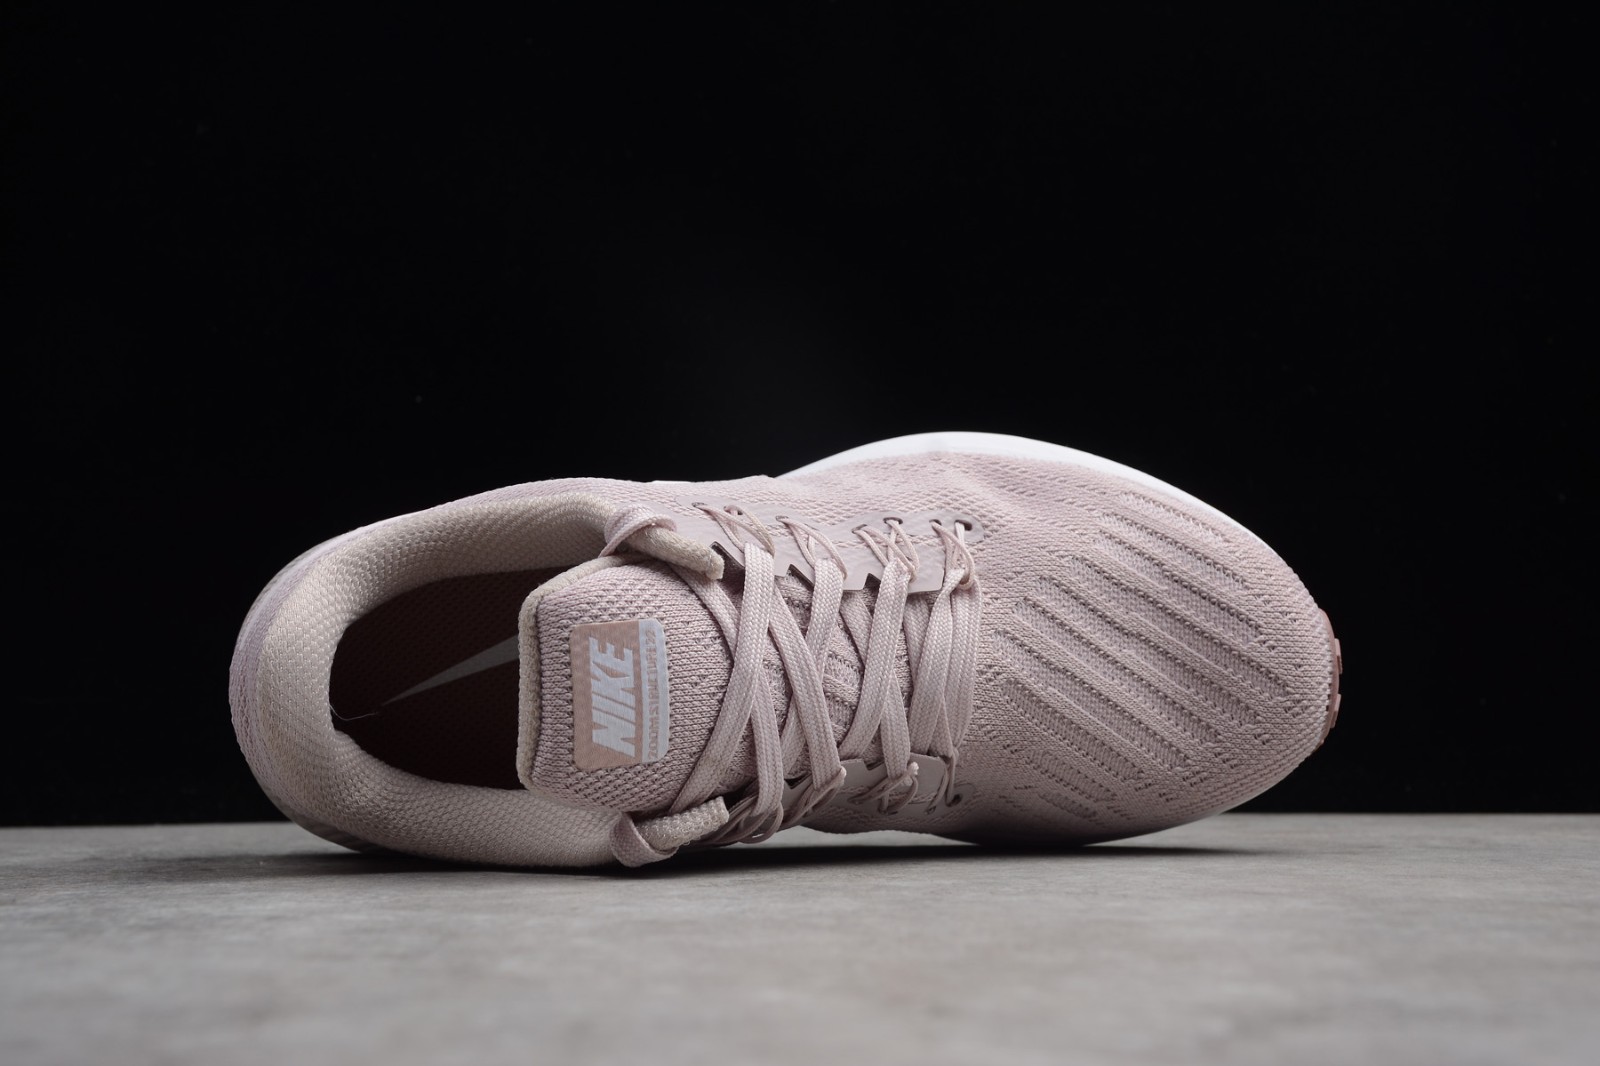 Tener un picnic Cadena Illinois zapatillas de running New Balance distancias cortas talla 38.5 - Nike Air  Zoom Structure 22 Particle Rose Pale Pink White Womens Running Shoes AA1640  600 - RvceShops